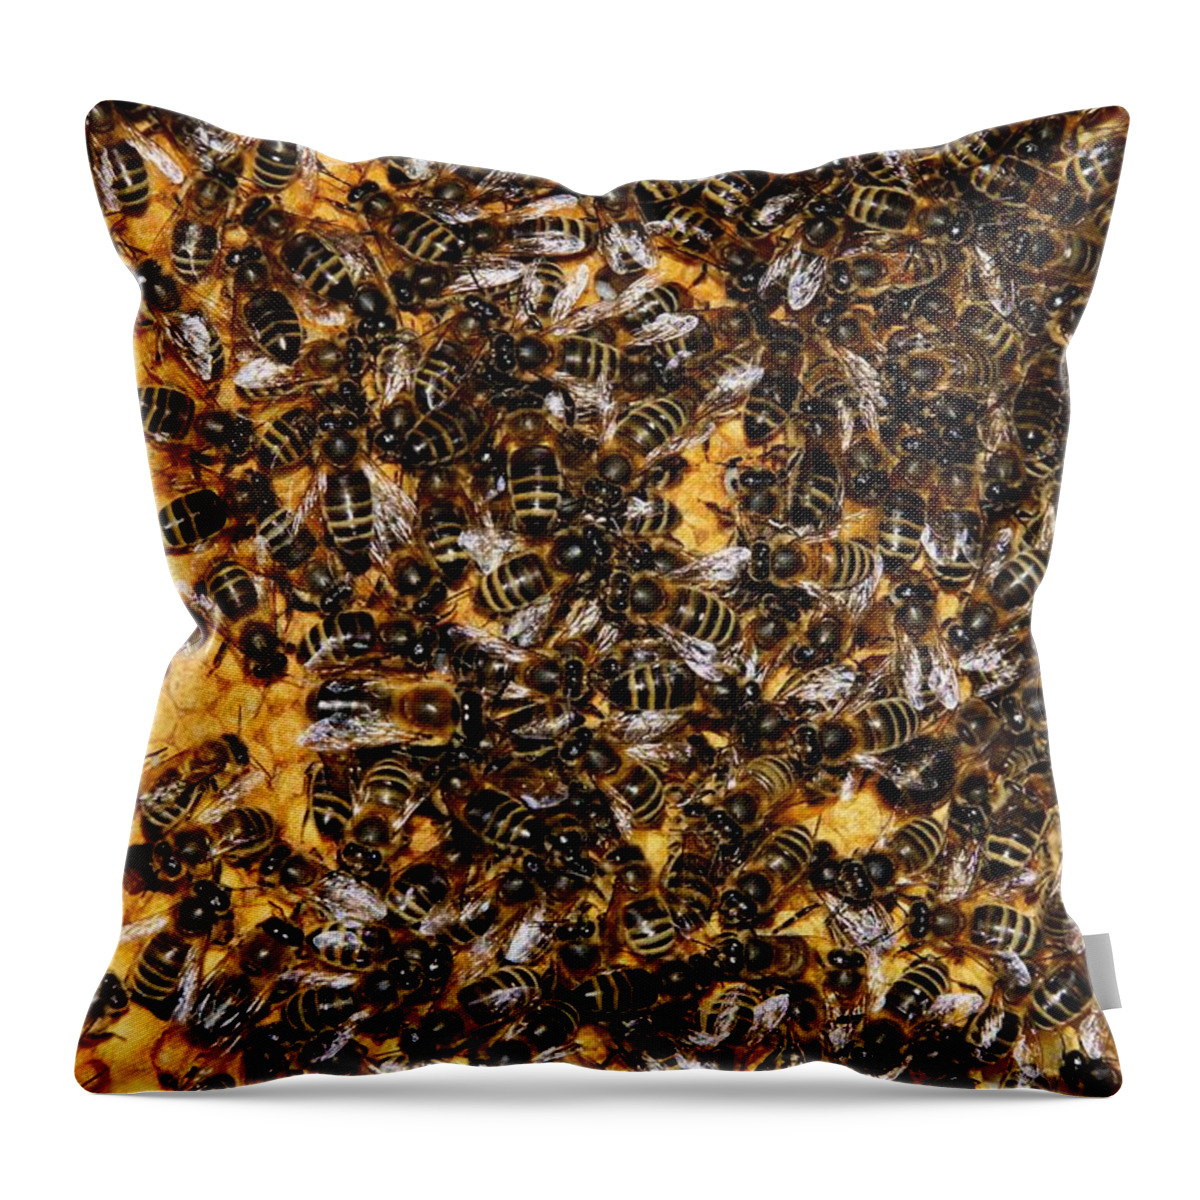 Honeybee Throw Pillow featuring the photograph All work and no play by Ron Harpham